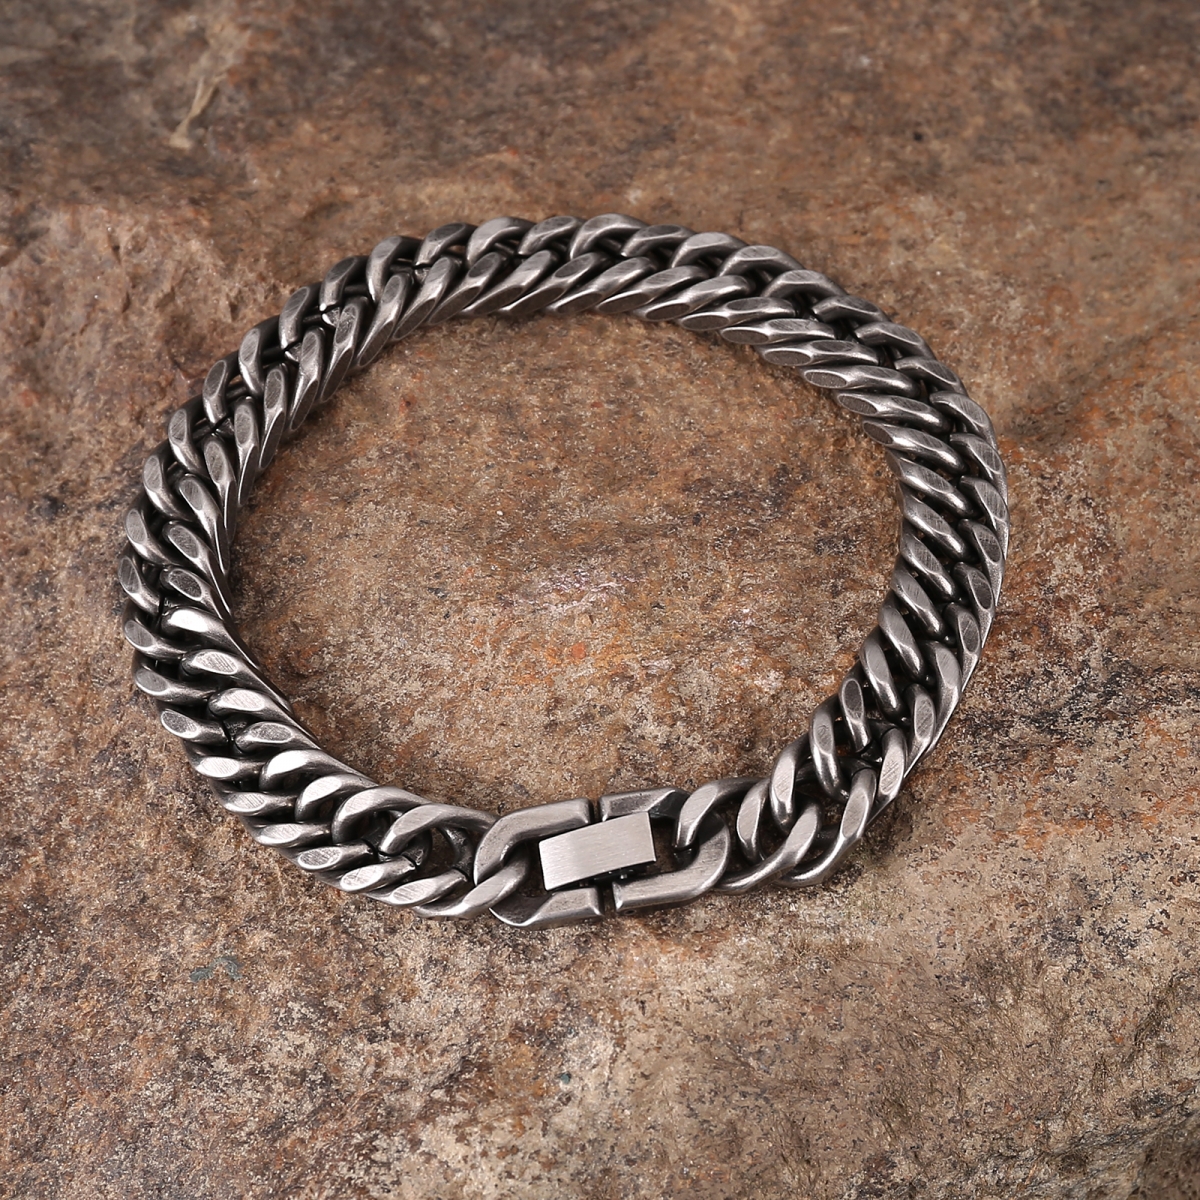 Antique Link Chain Bracelet 8mm US$3.8/PC-NORSECOLLECTION- Viking Jewelry,Viking Necklace,Viking Bracelet,Viking Rings,Viking Mugs,Viking Accessories,Viking Crafts